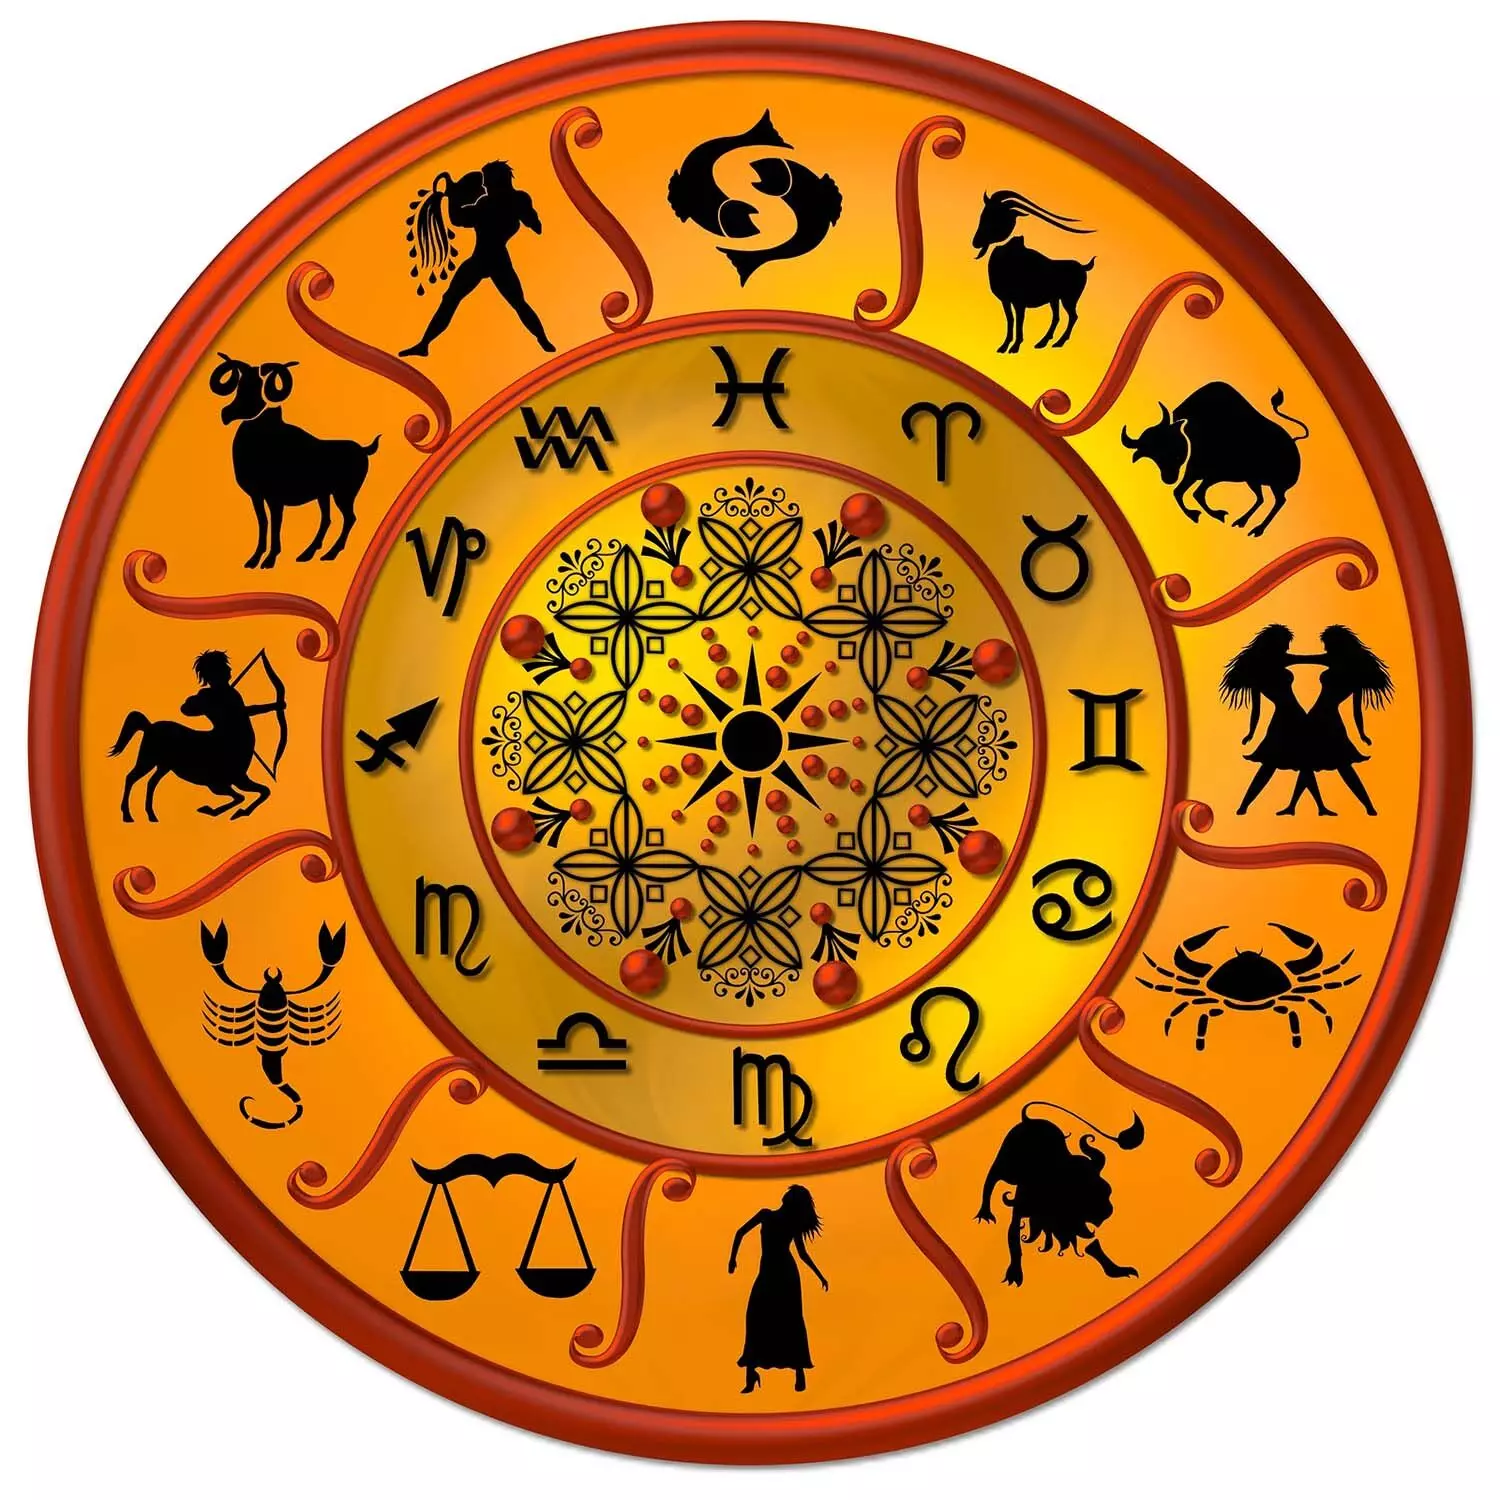 26 July – Know your todays horoscope